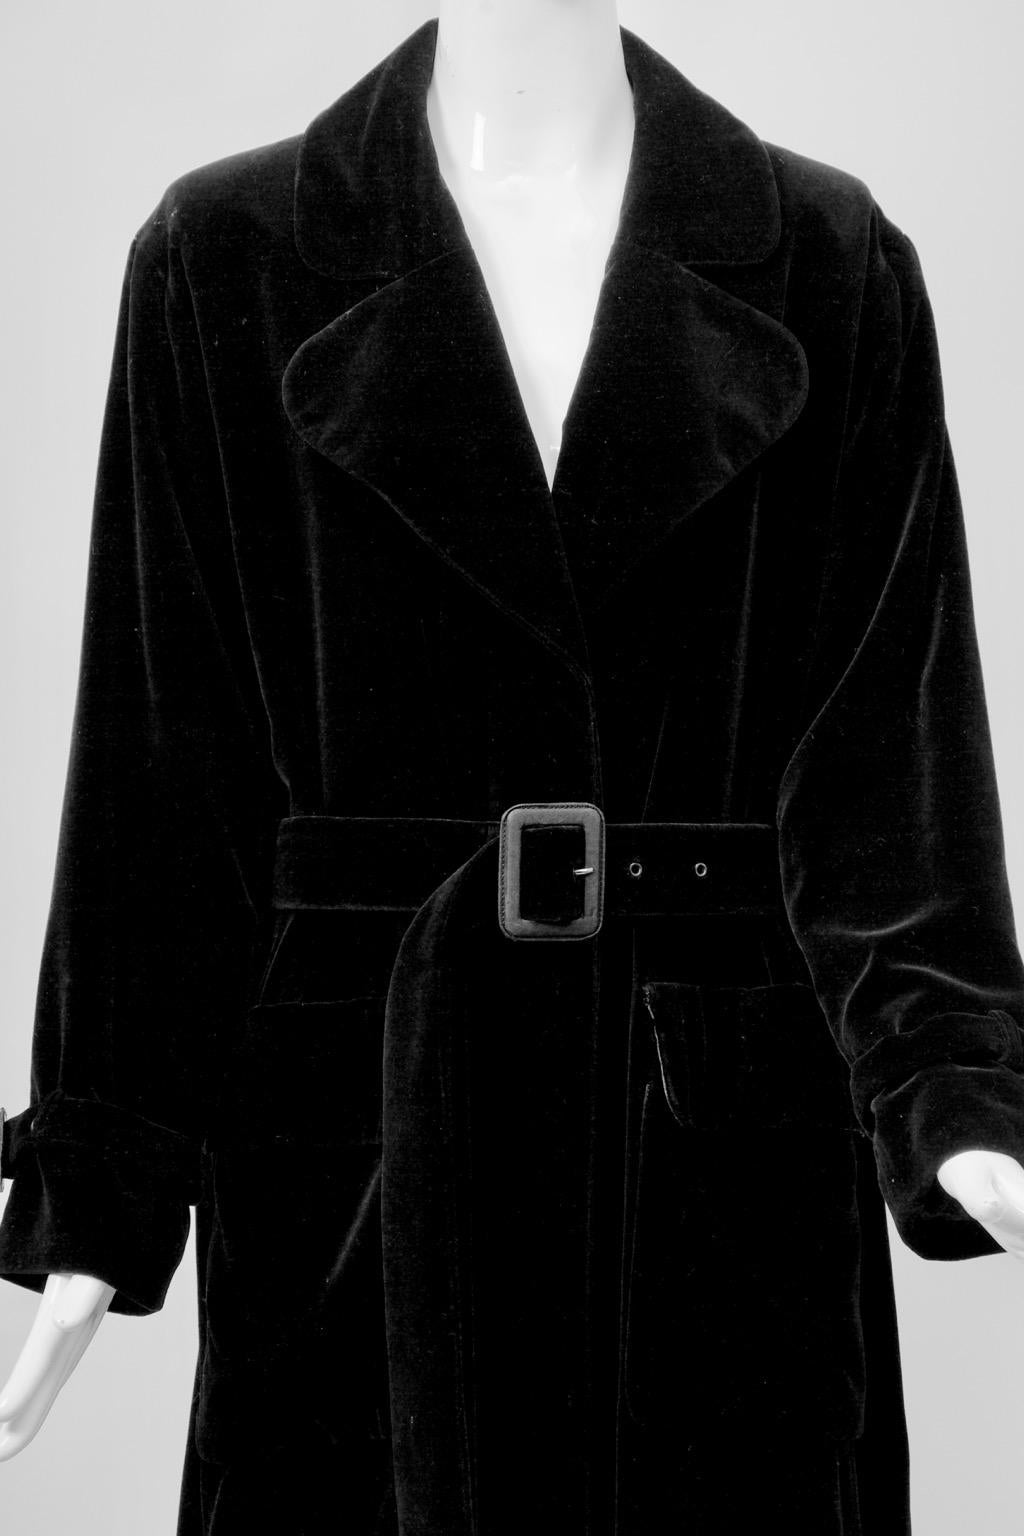 Yves Saint Laurent ankle-length trench coat with adjustable self belt and belted wrists. The coat features a wide notched collar and single-breasted closure with covered placket and open vent in back. Oversized cut. Black satin lining. Cotton blend